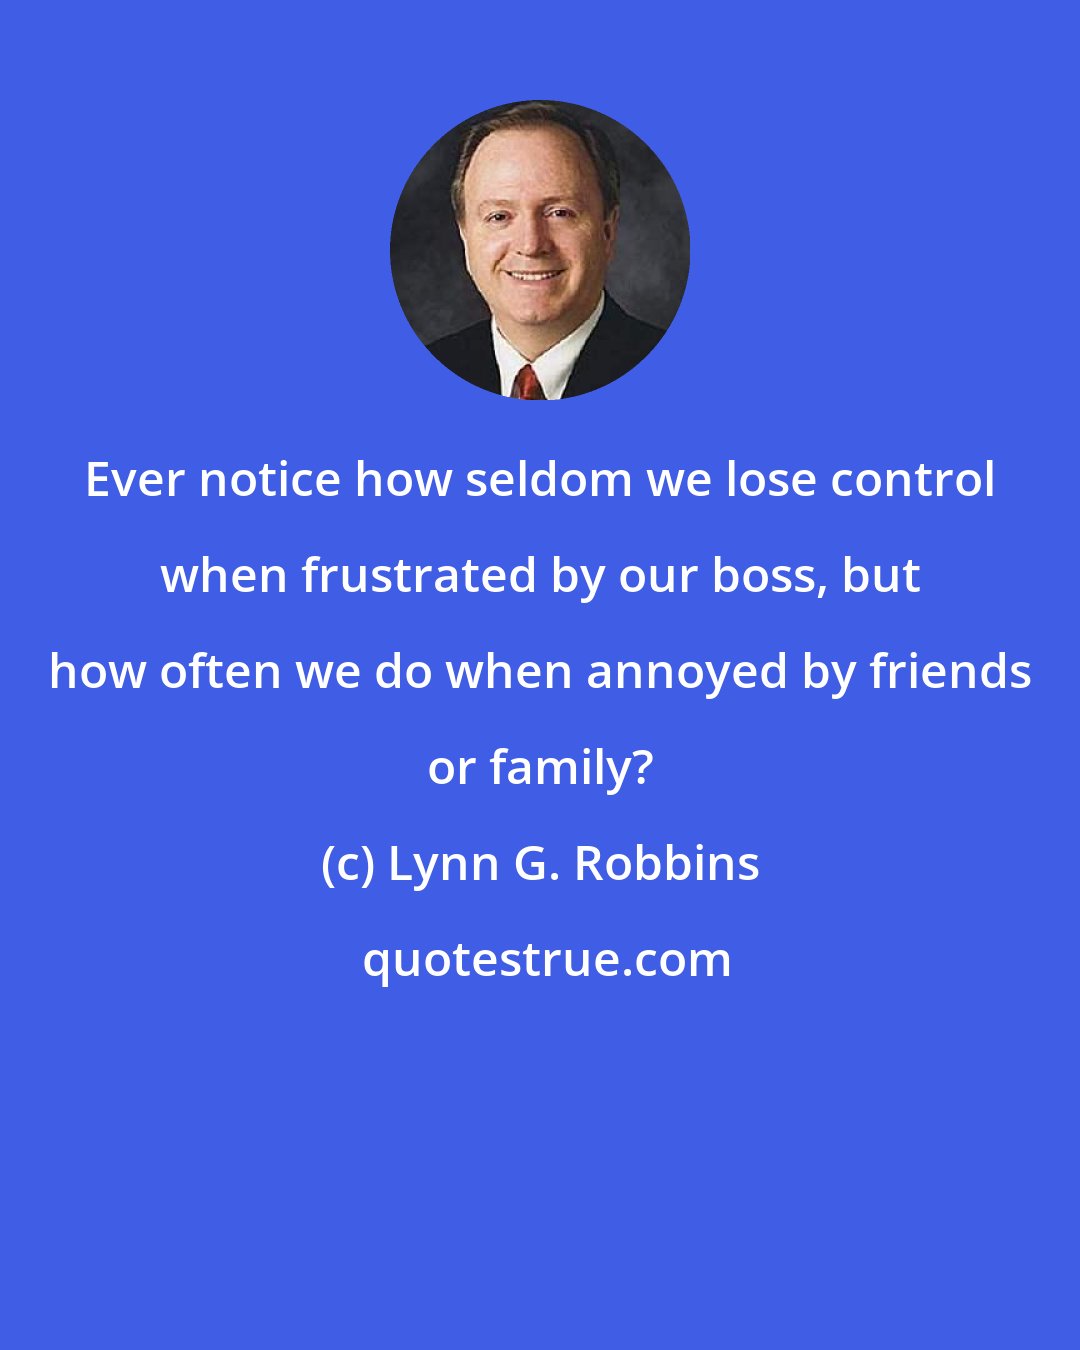 Lynn G. Robbins: Ever notice how seldom we lose control when frustrated by our boss, but how often we do when annoyed by friends or family?